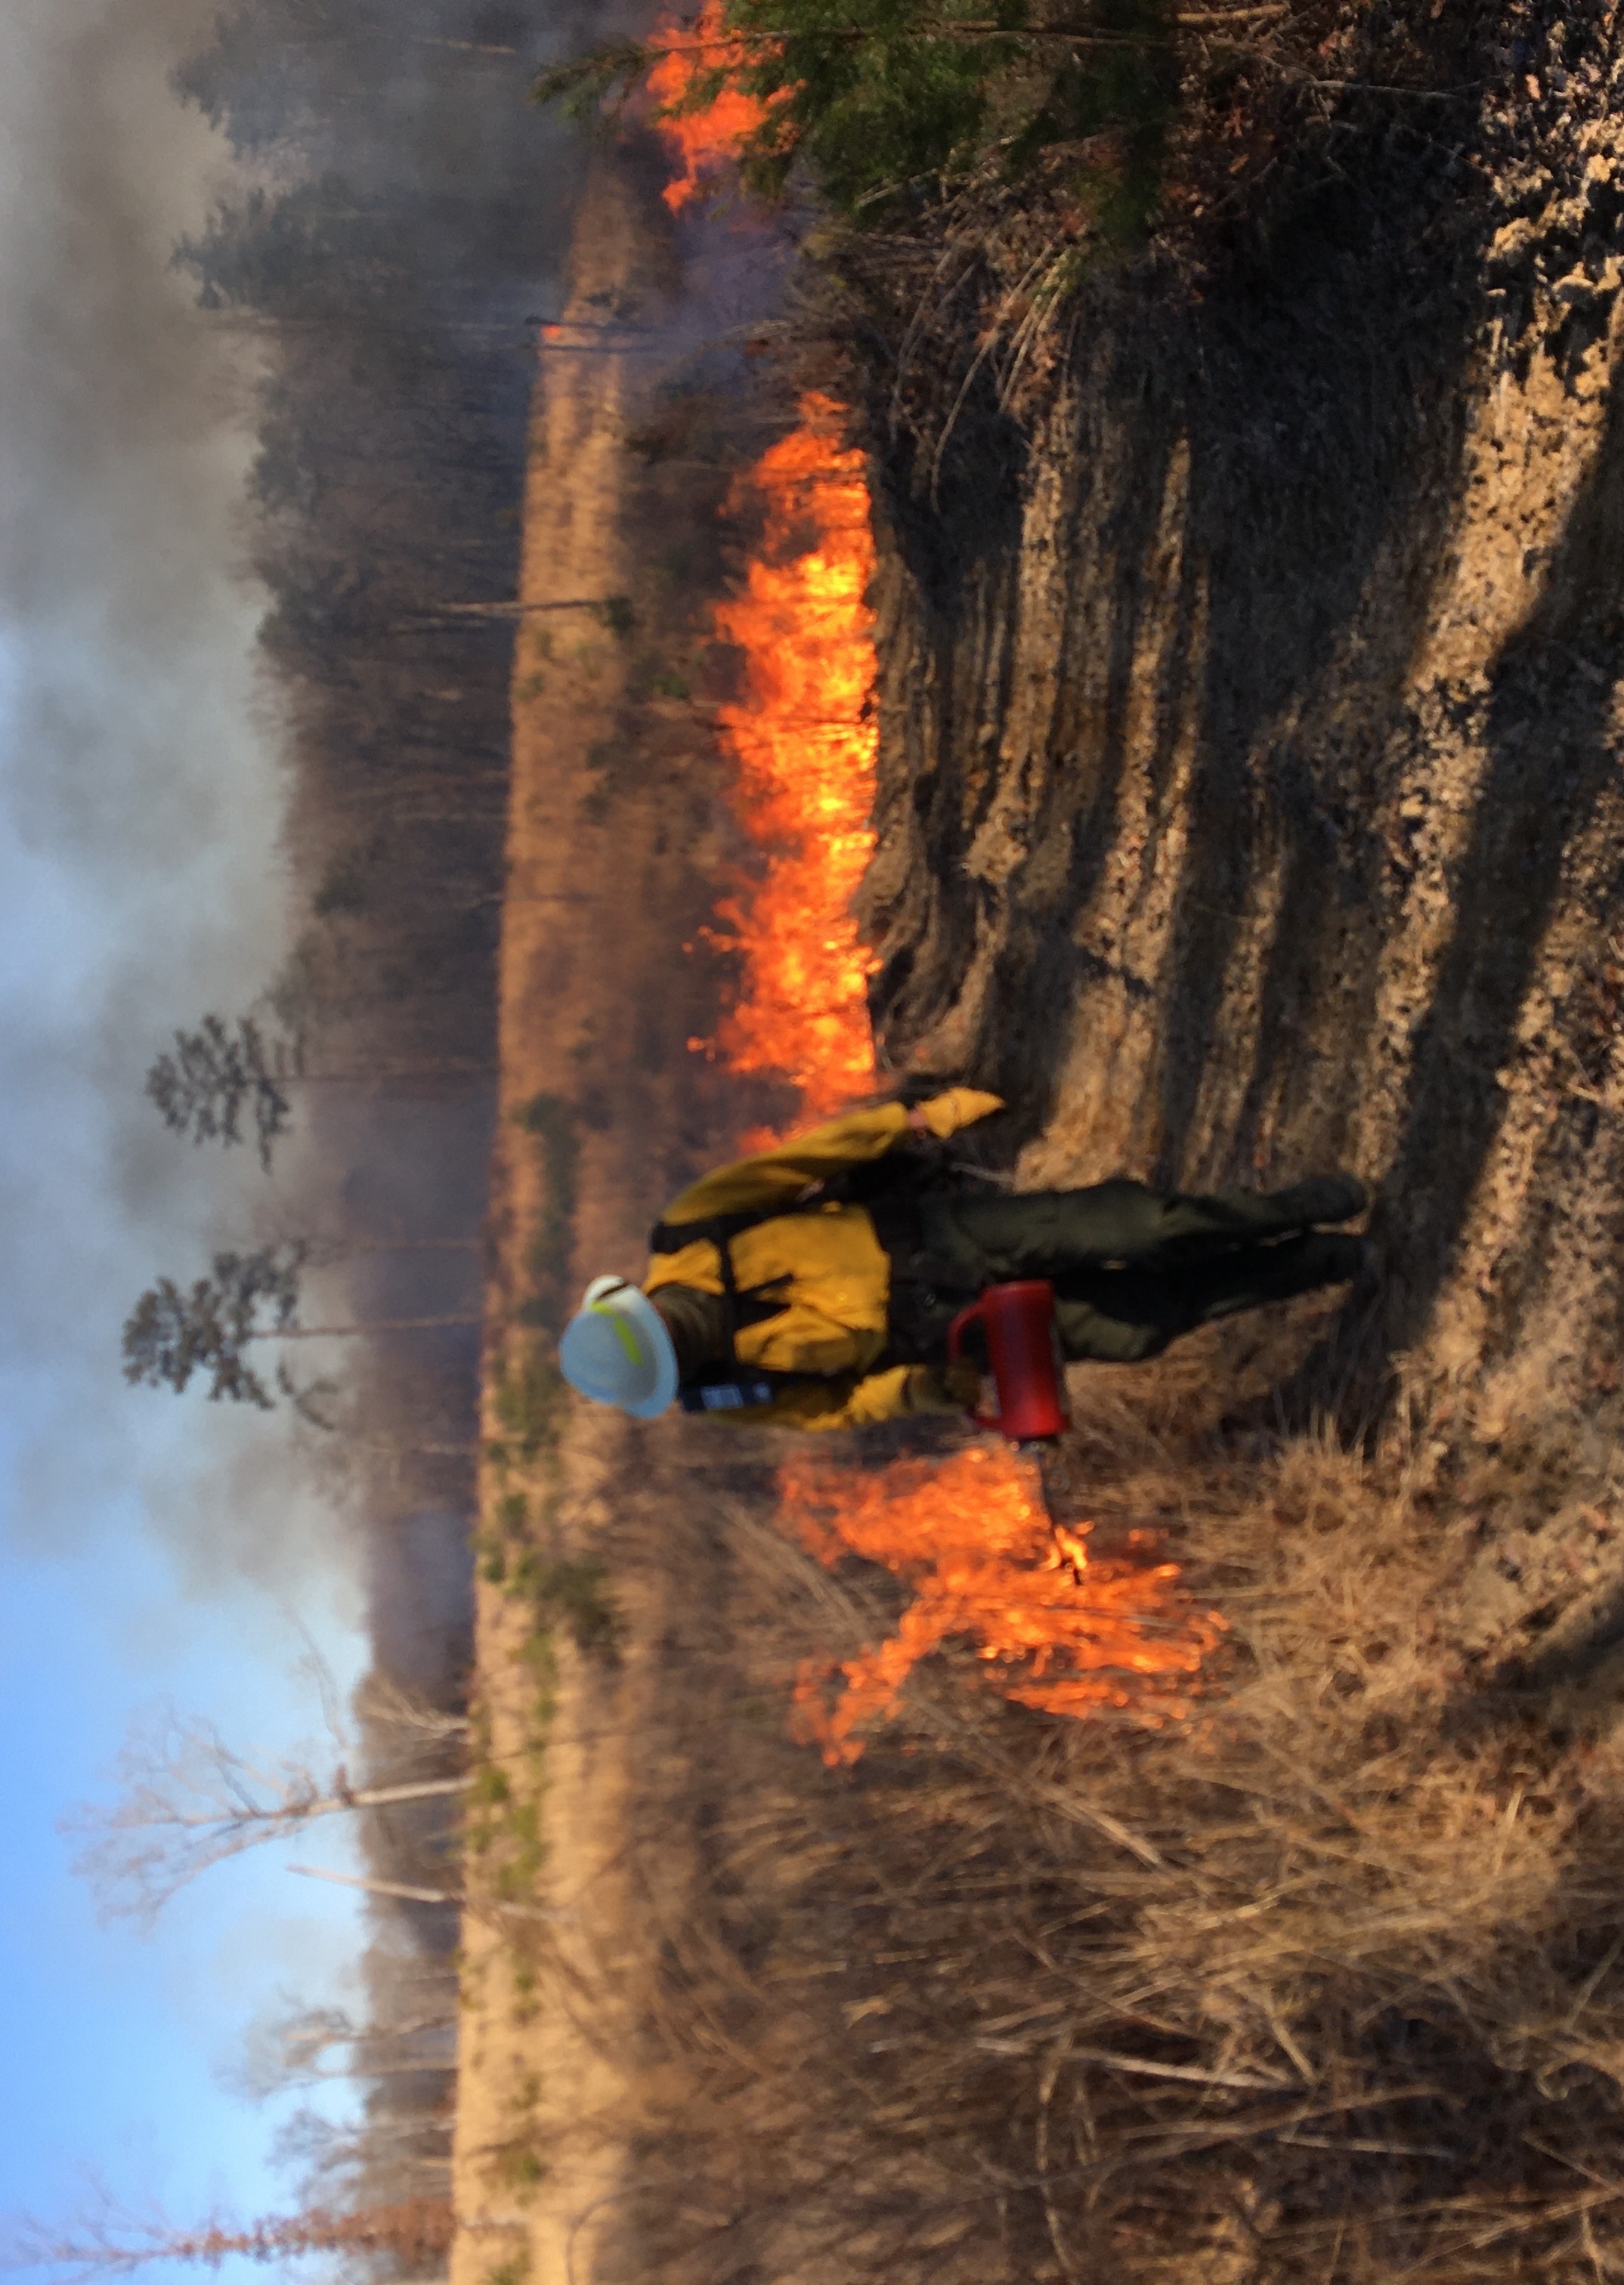 A staff member delivers fire to a portion of the preserve.